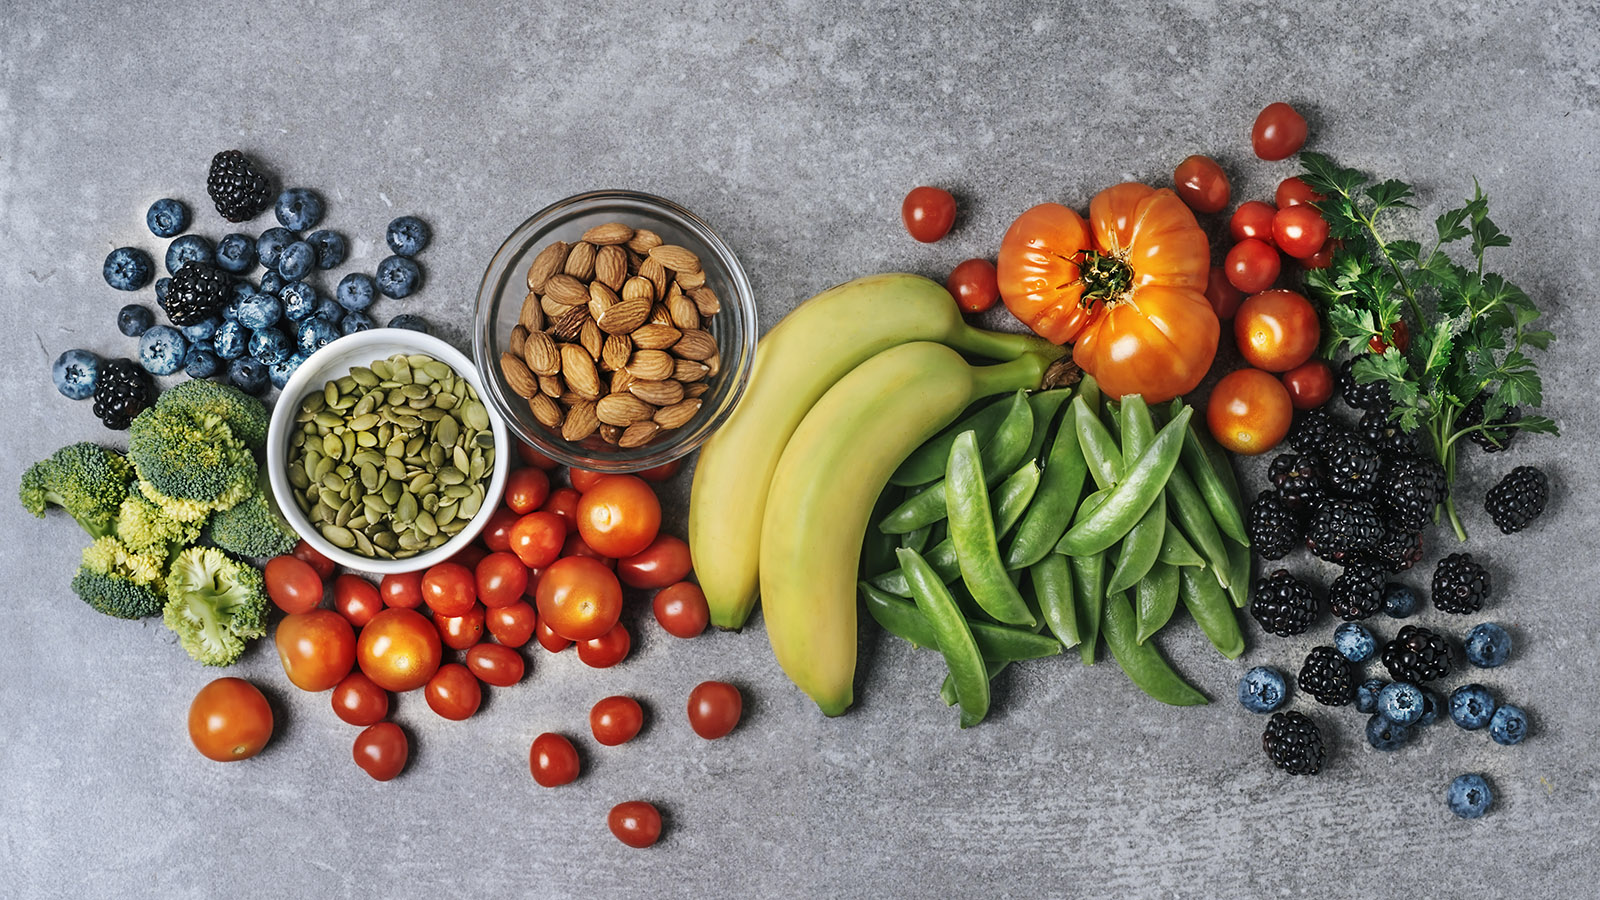 Nutrition for Your Life: Eat to Fuel, not Fill – Western Wisconsin Health